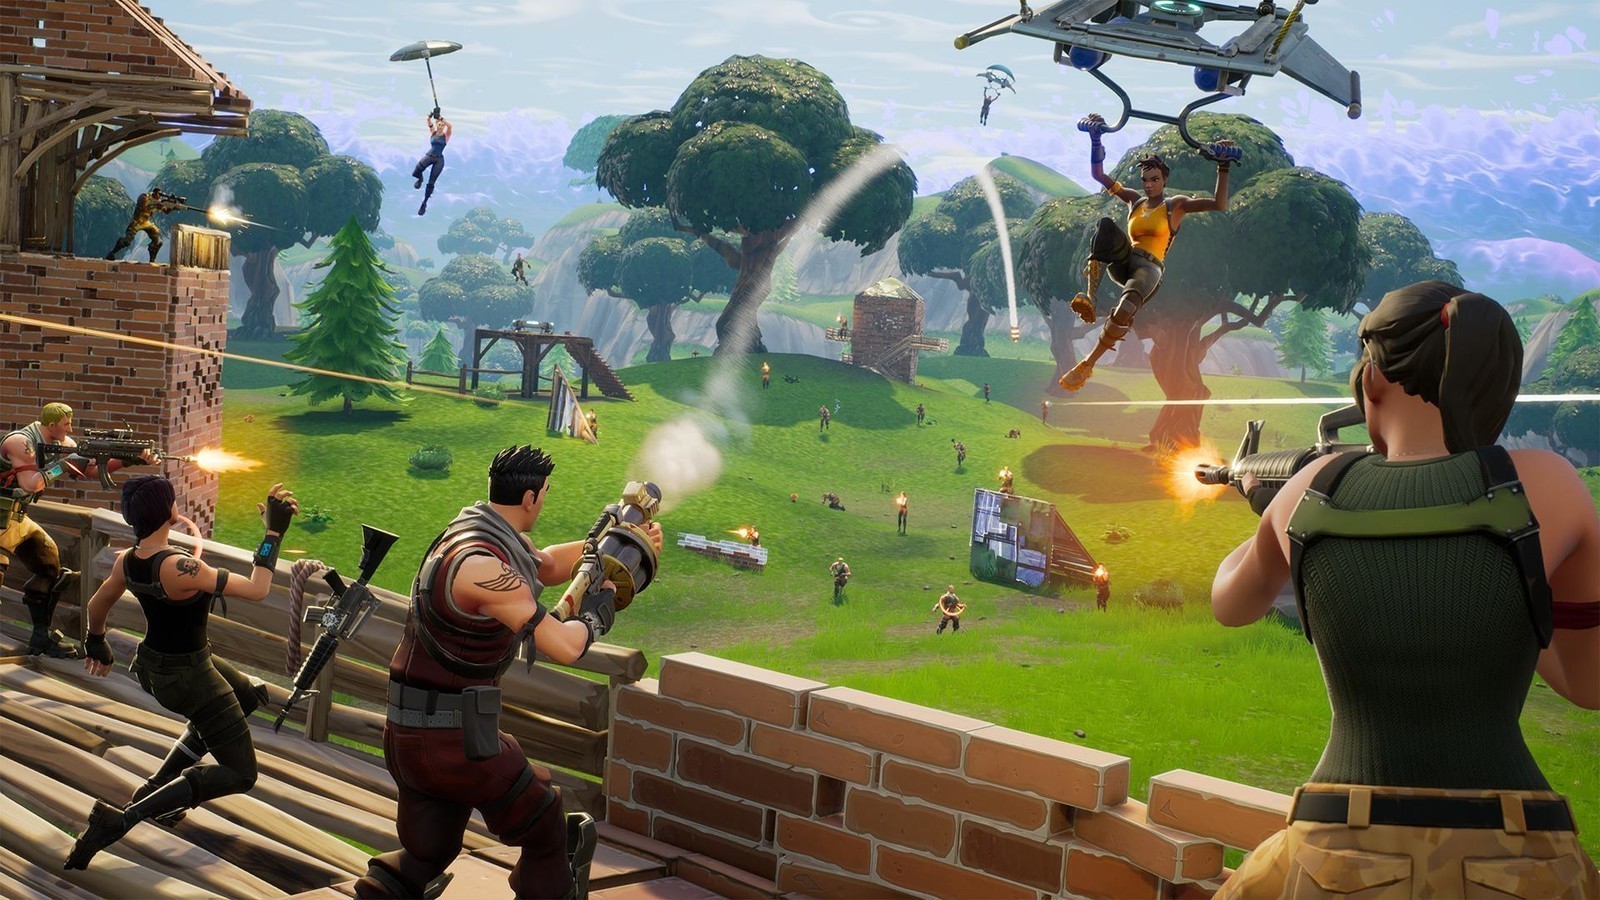 You can finally enjoy Fortnite on Android this July 2018